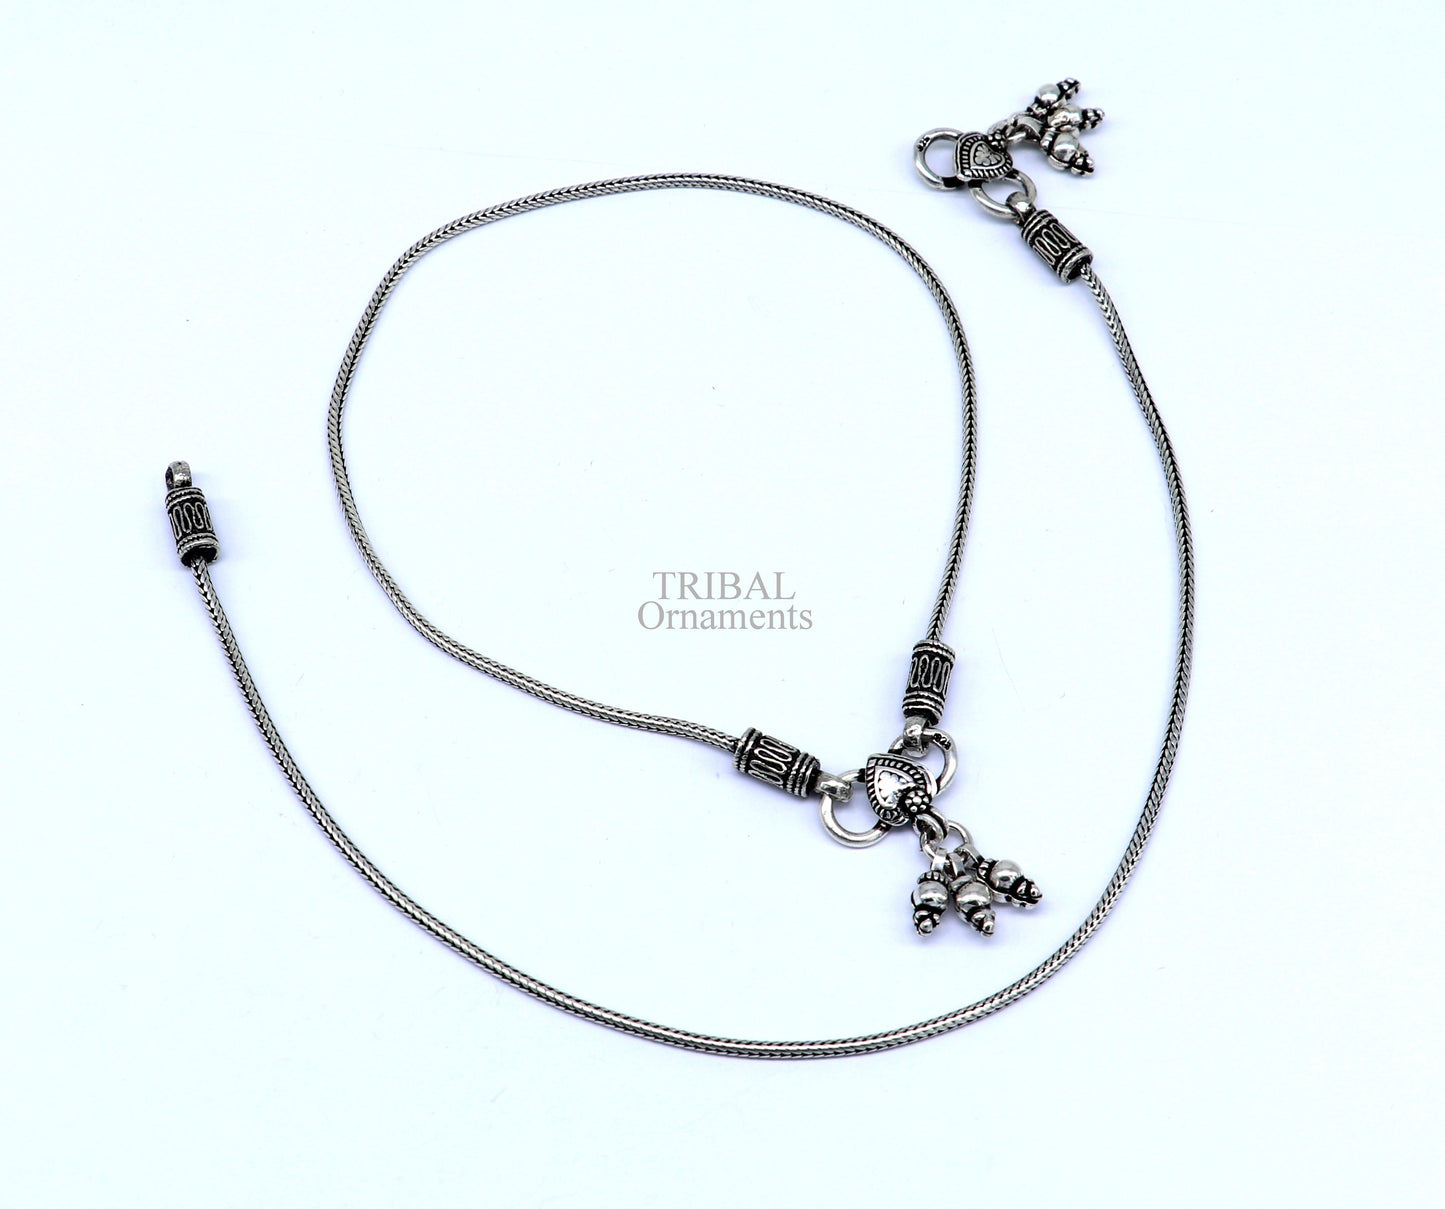 10.5" 925 Sterling silver handmade wheat chain ankle bracelet, vintage oxidized charm anklets, tribal belly dance customized jewelry nank468 - TRIBAL ORNAMENTS